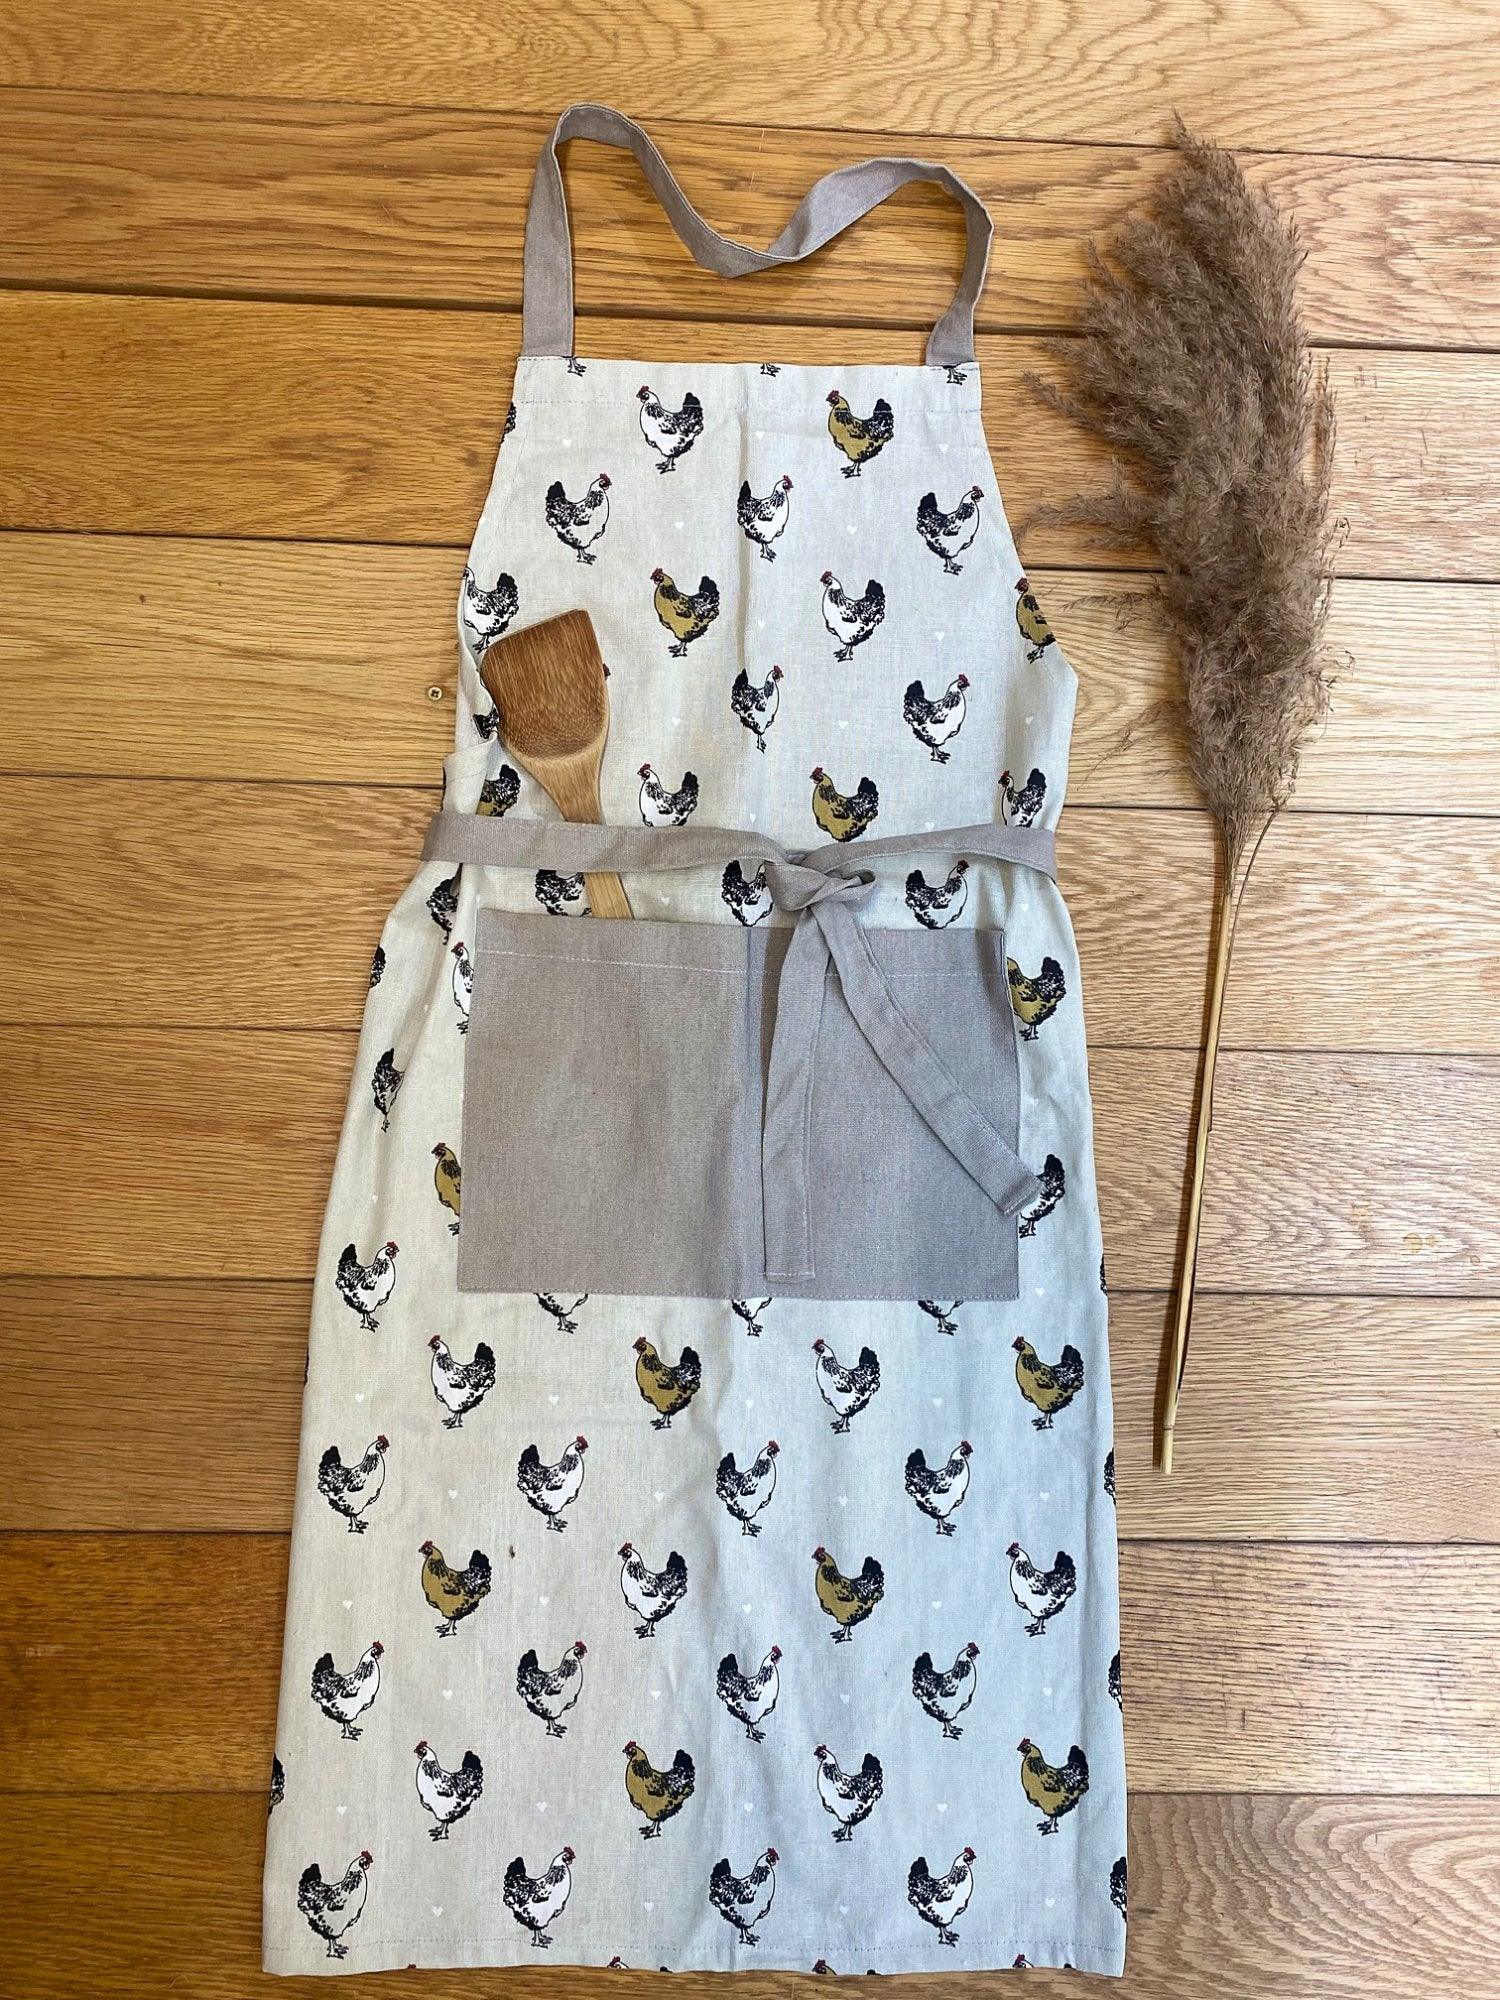 View Apron With A Chicken Print Design information